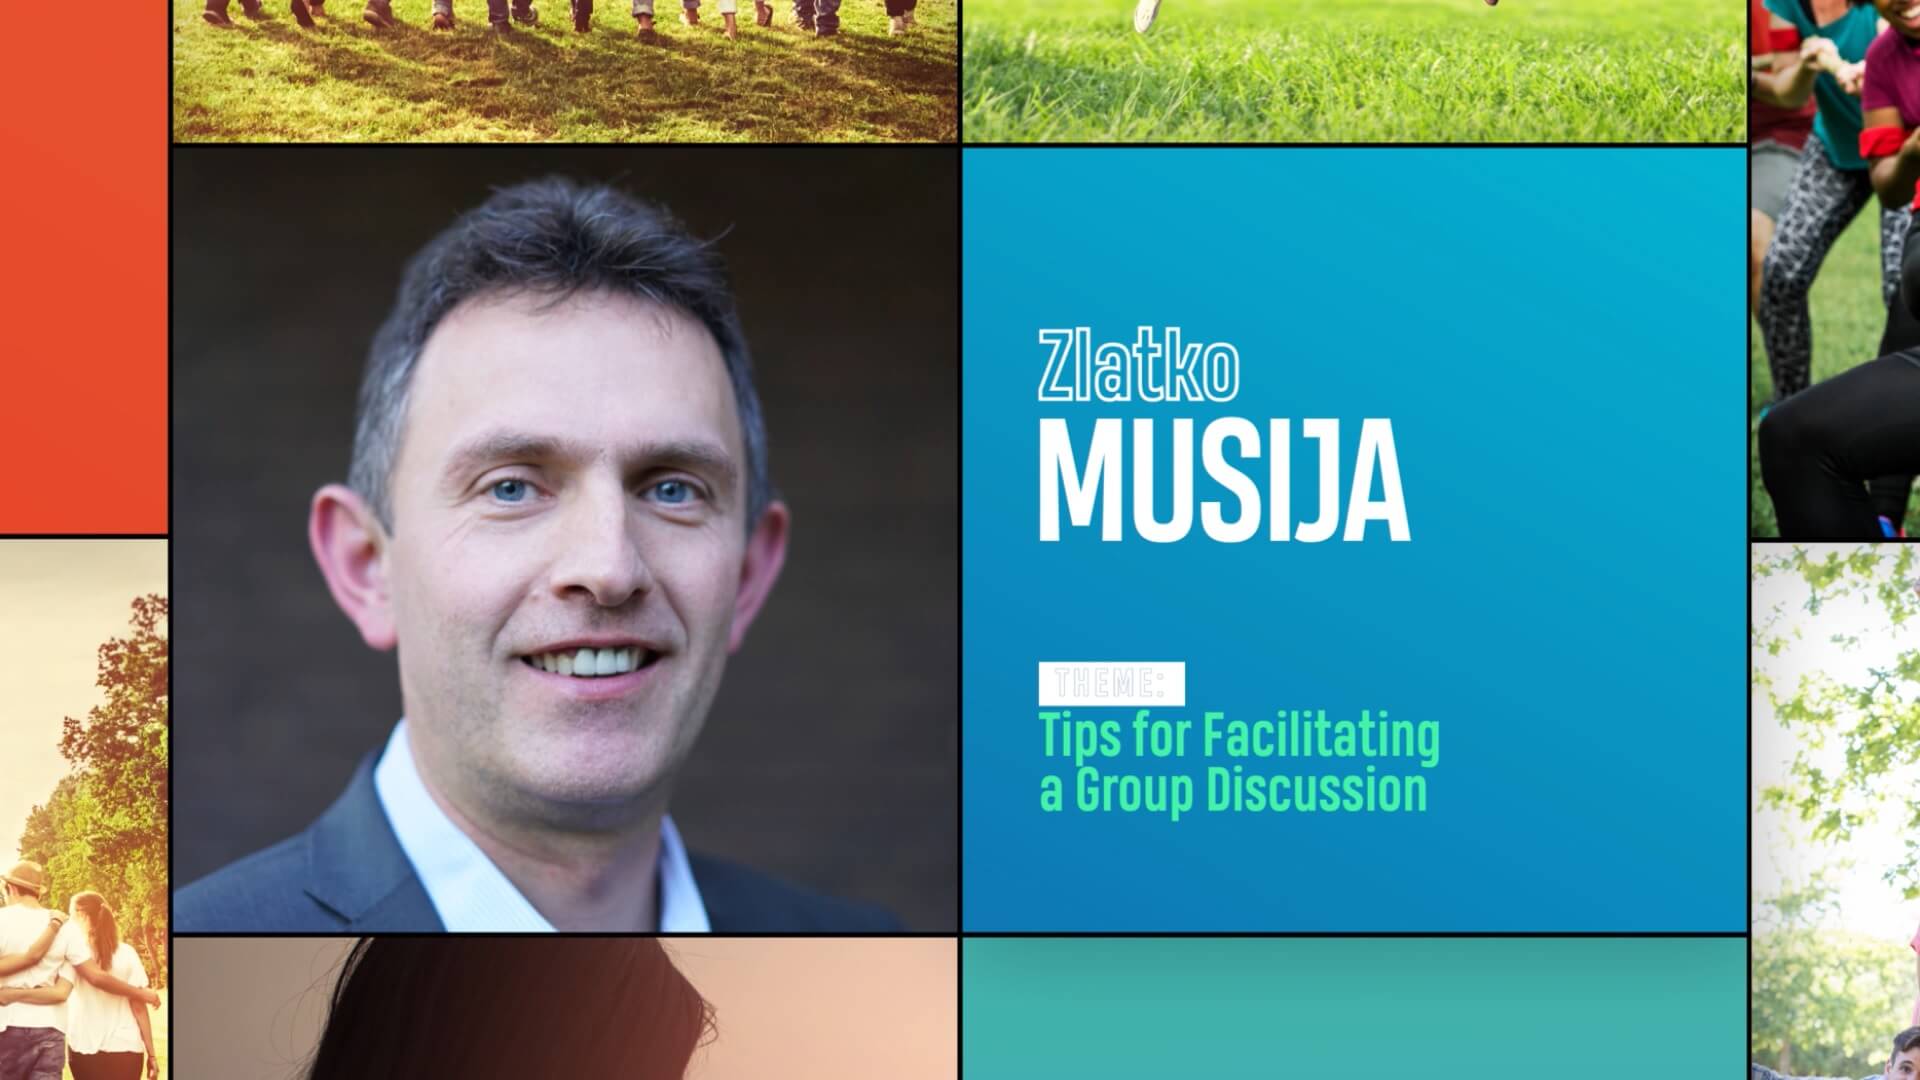 Z.Musija tips for facilitating a group discussion